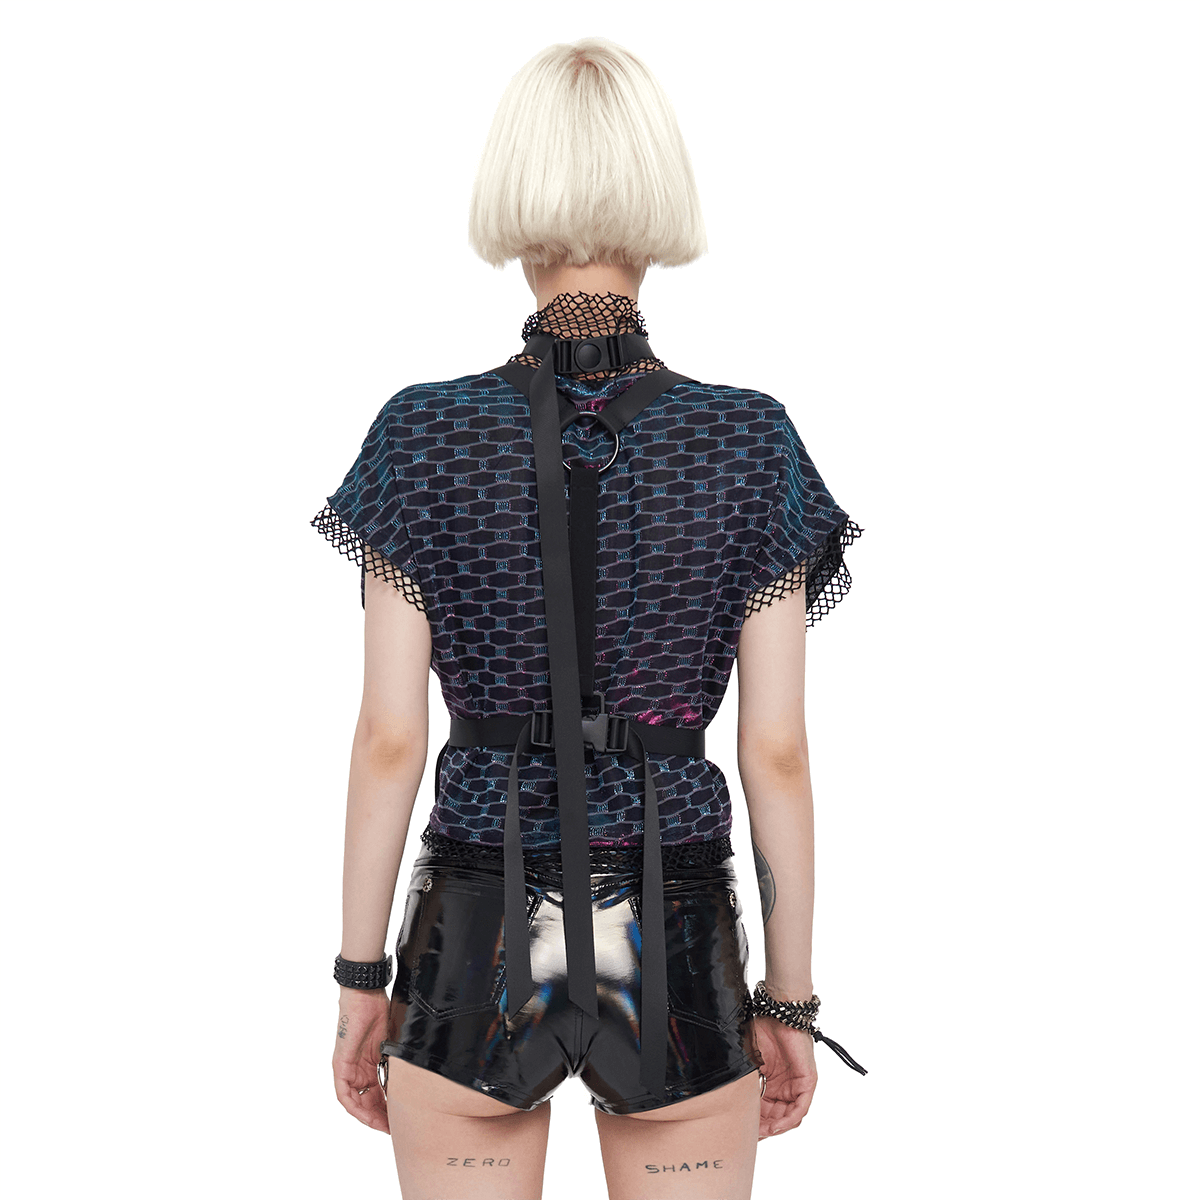 Women's Grunge Batwing Short Sleeves Loose Top / Round Neck Mesh Top with Buckle Strap Body Harness